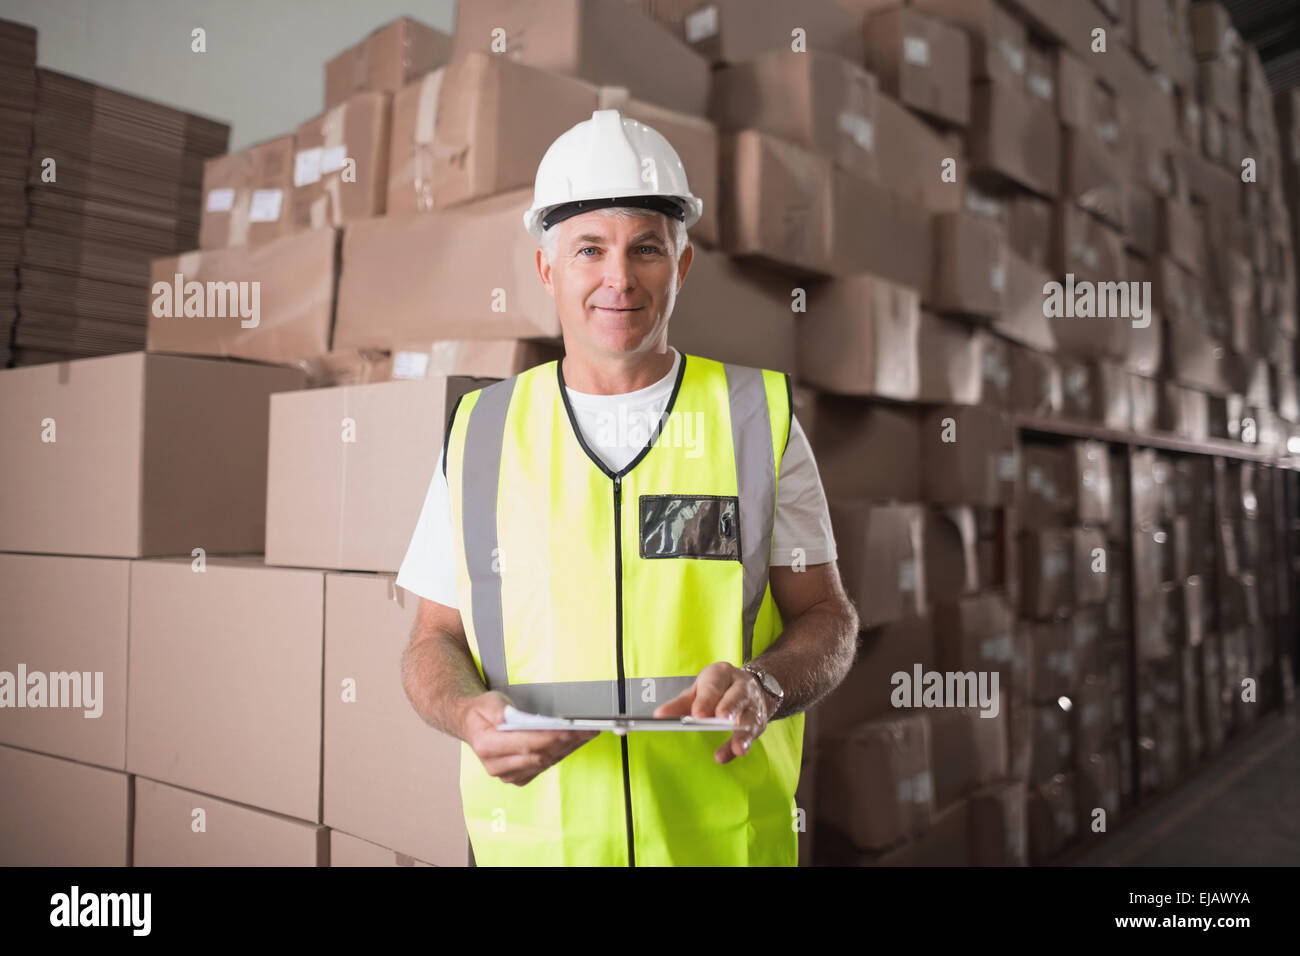 Portrait of manual worker in warehouse Stock Photo